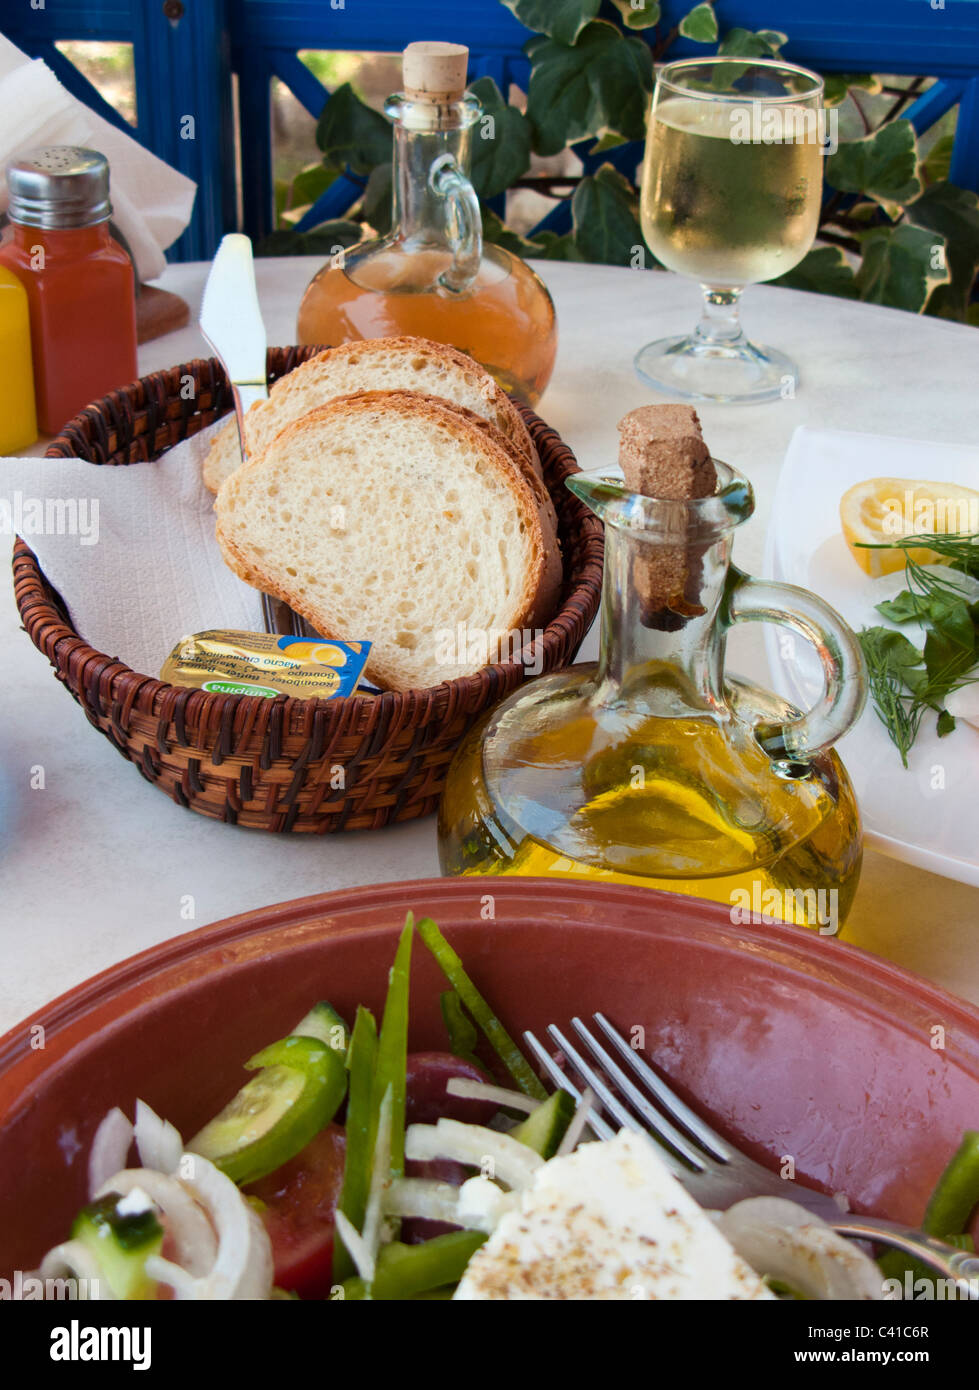 SELECTIVE FOCUS IMAGE OF OLIVE OIL AND BREAD IN A GREEK TAVERNA WITH SALAD IN THE FOREGROUND Stock Photo